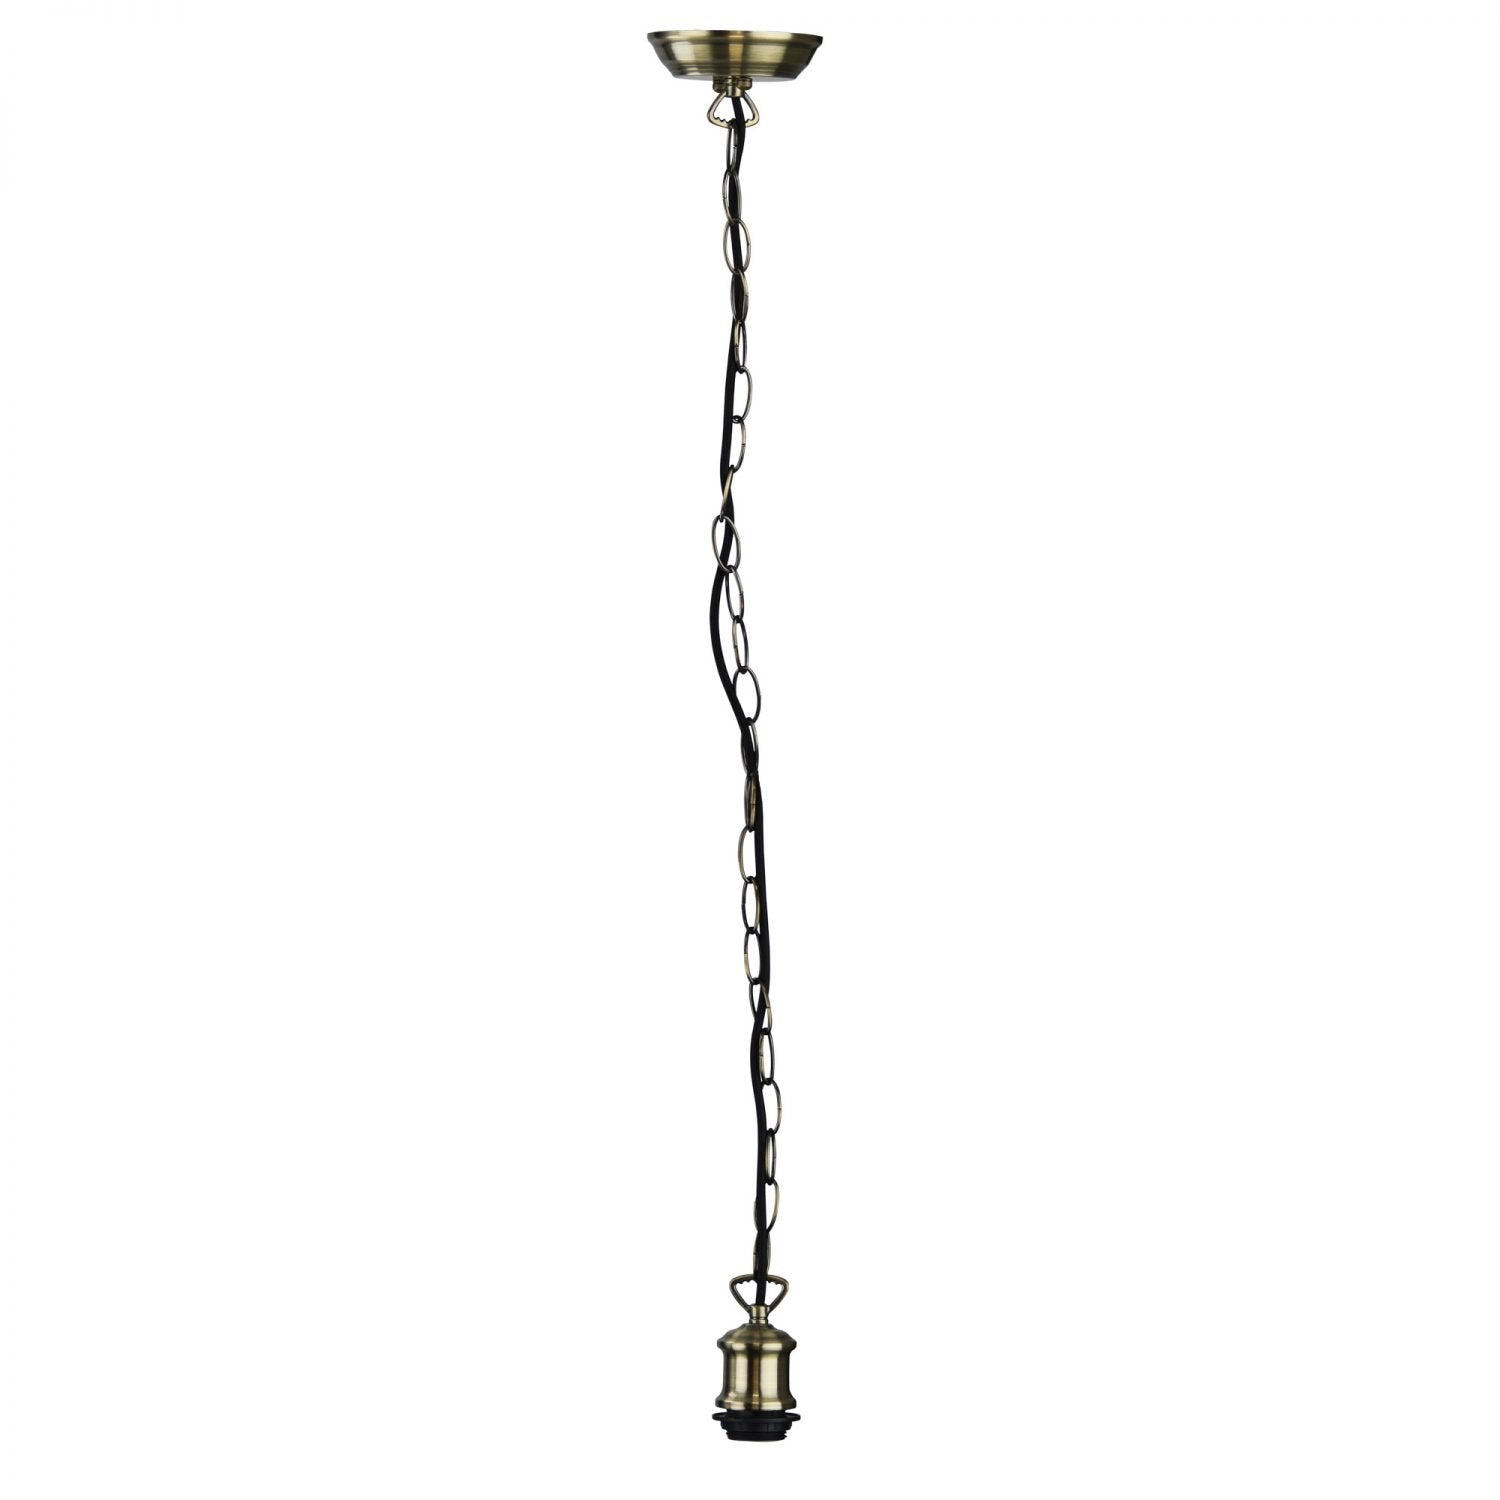 Albany Chain & Cloth Suspension Antique Brass - OL69322AB